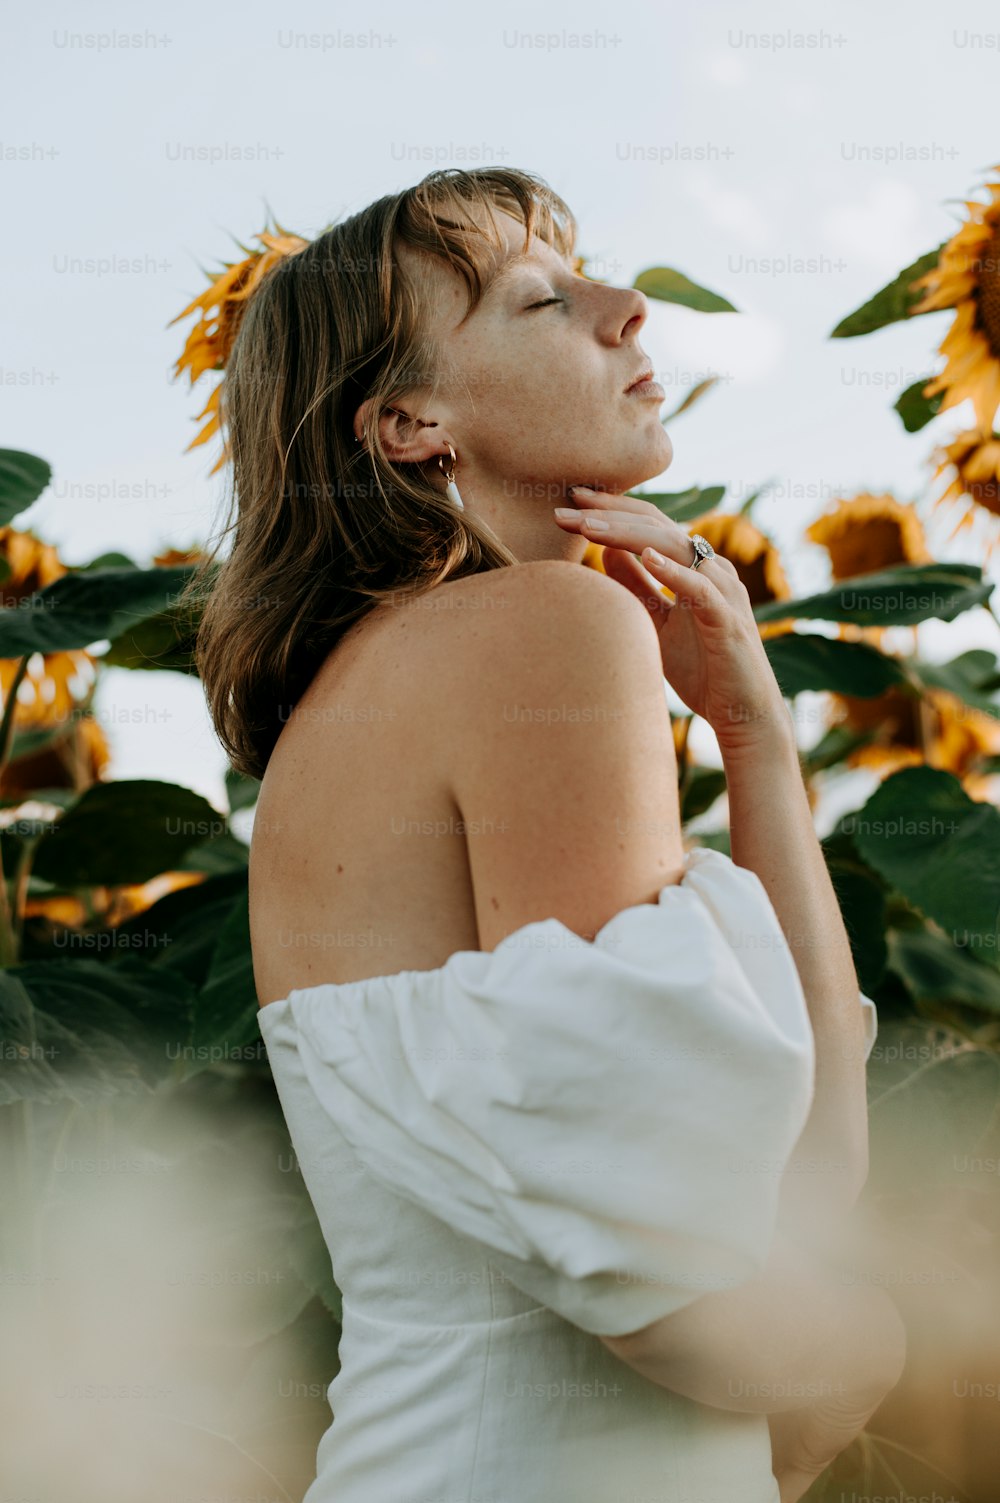 a woman in a white dress standing in a field of sunflowers